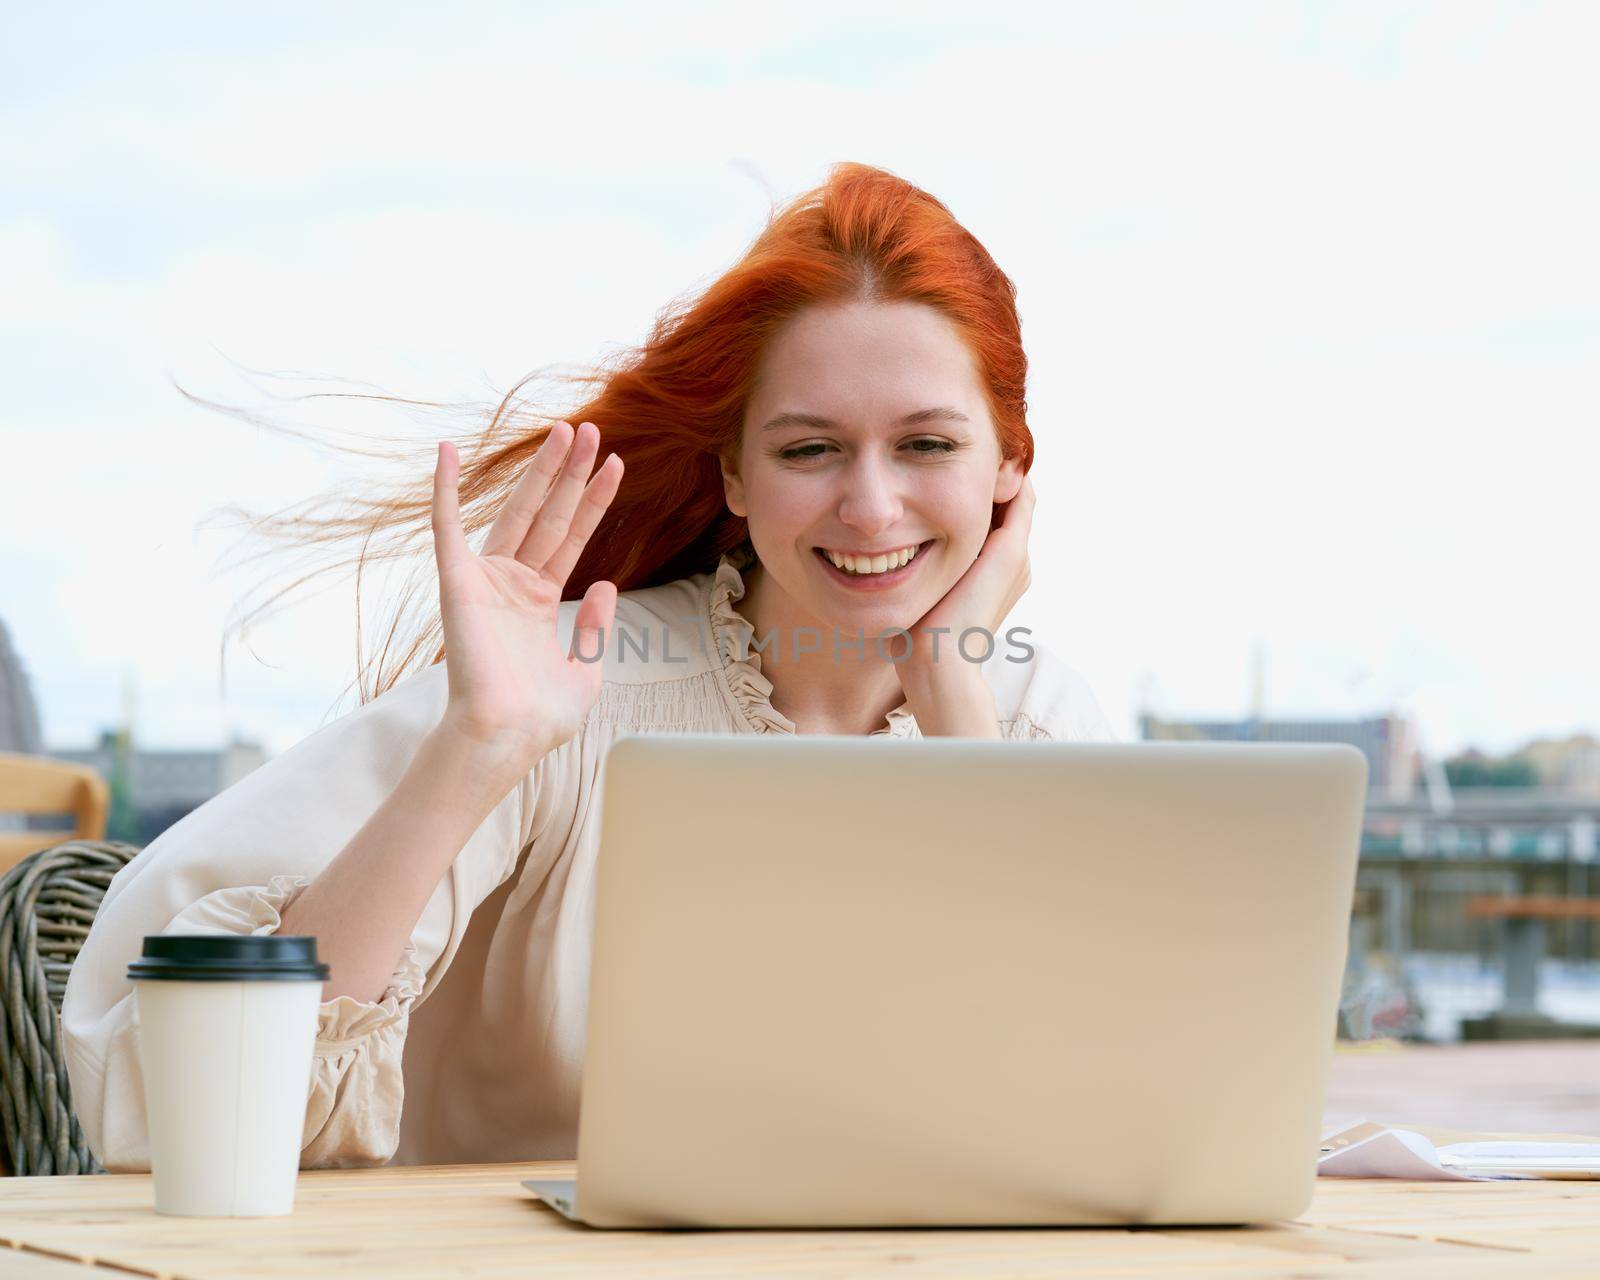 Cheerful redhead female chatting on laptop in cafe outside by NataBene